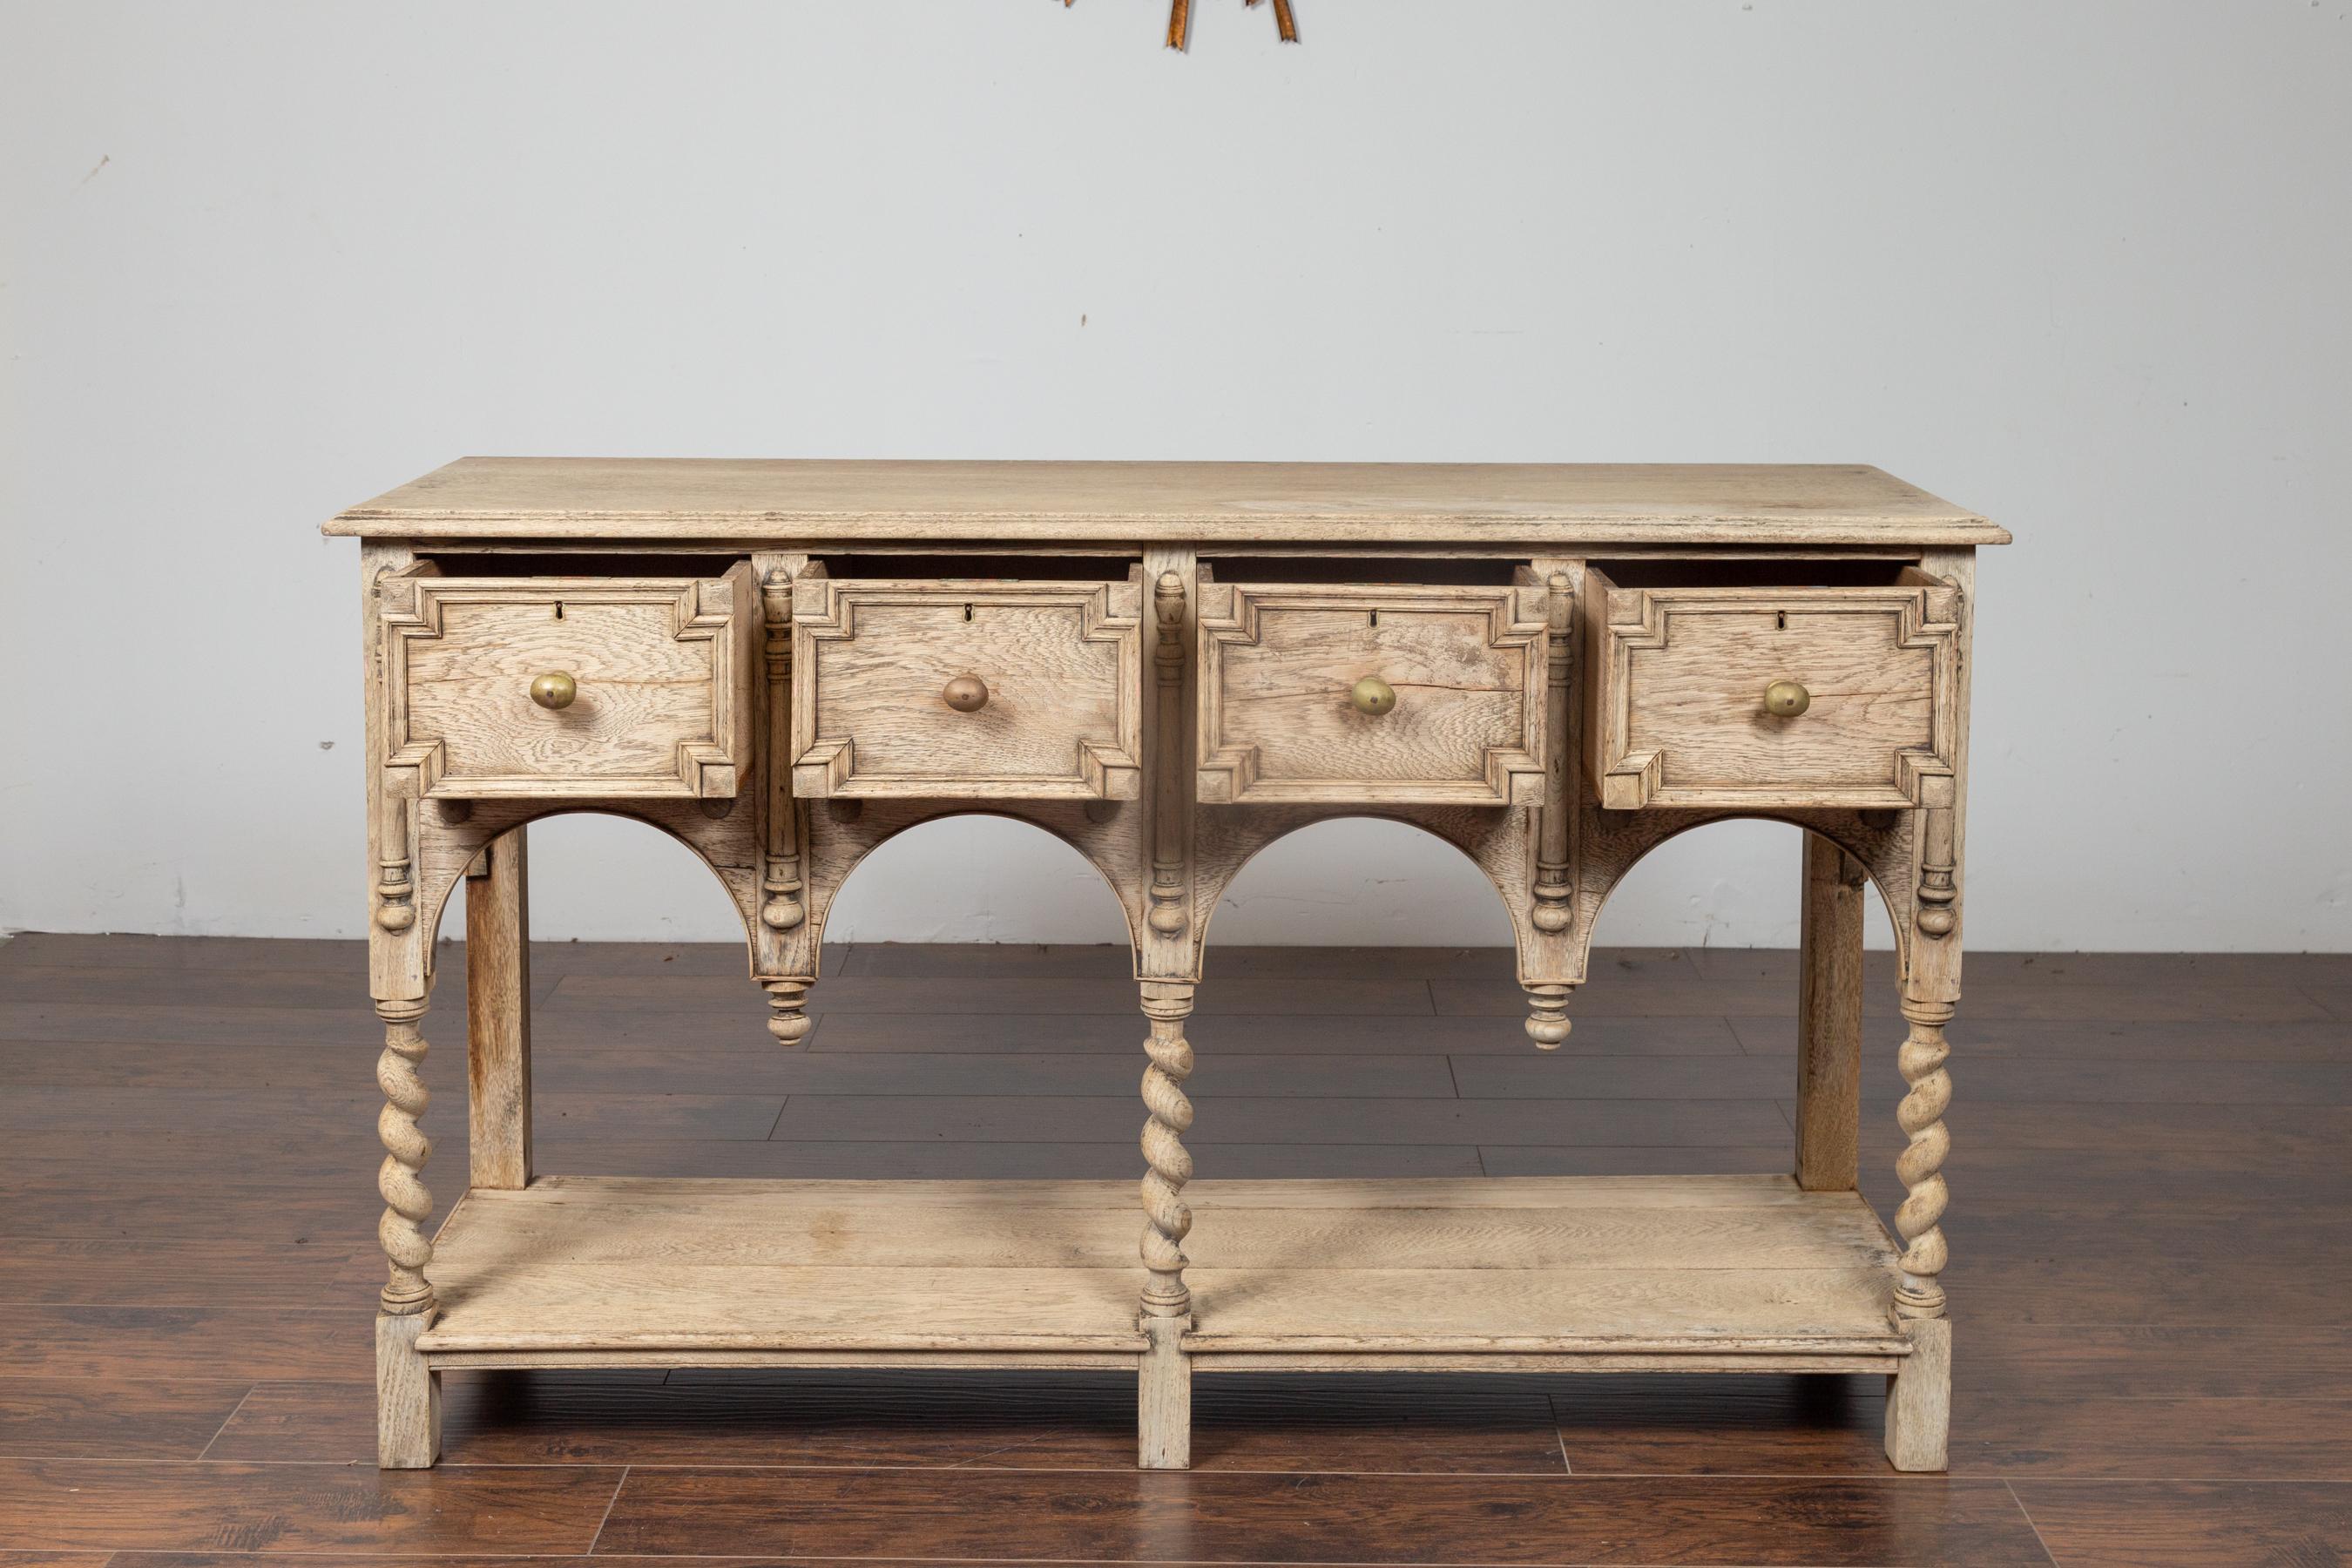 19th Century English Renaissance Revival Bleached Server with Drawers and Barley Twist Legs